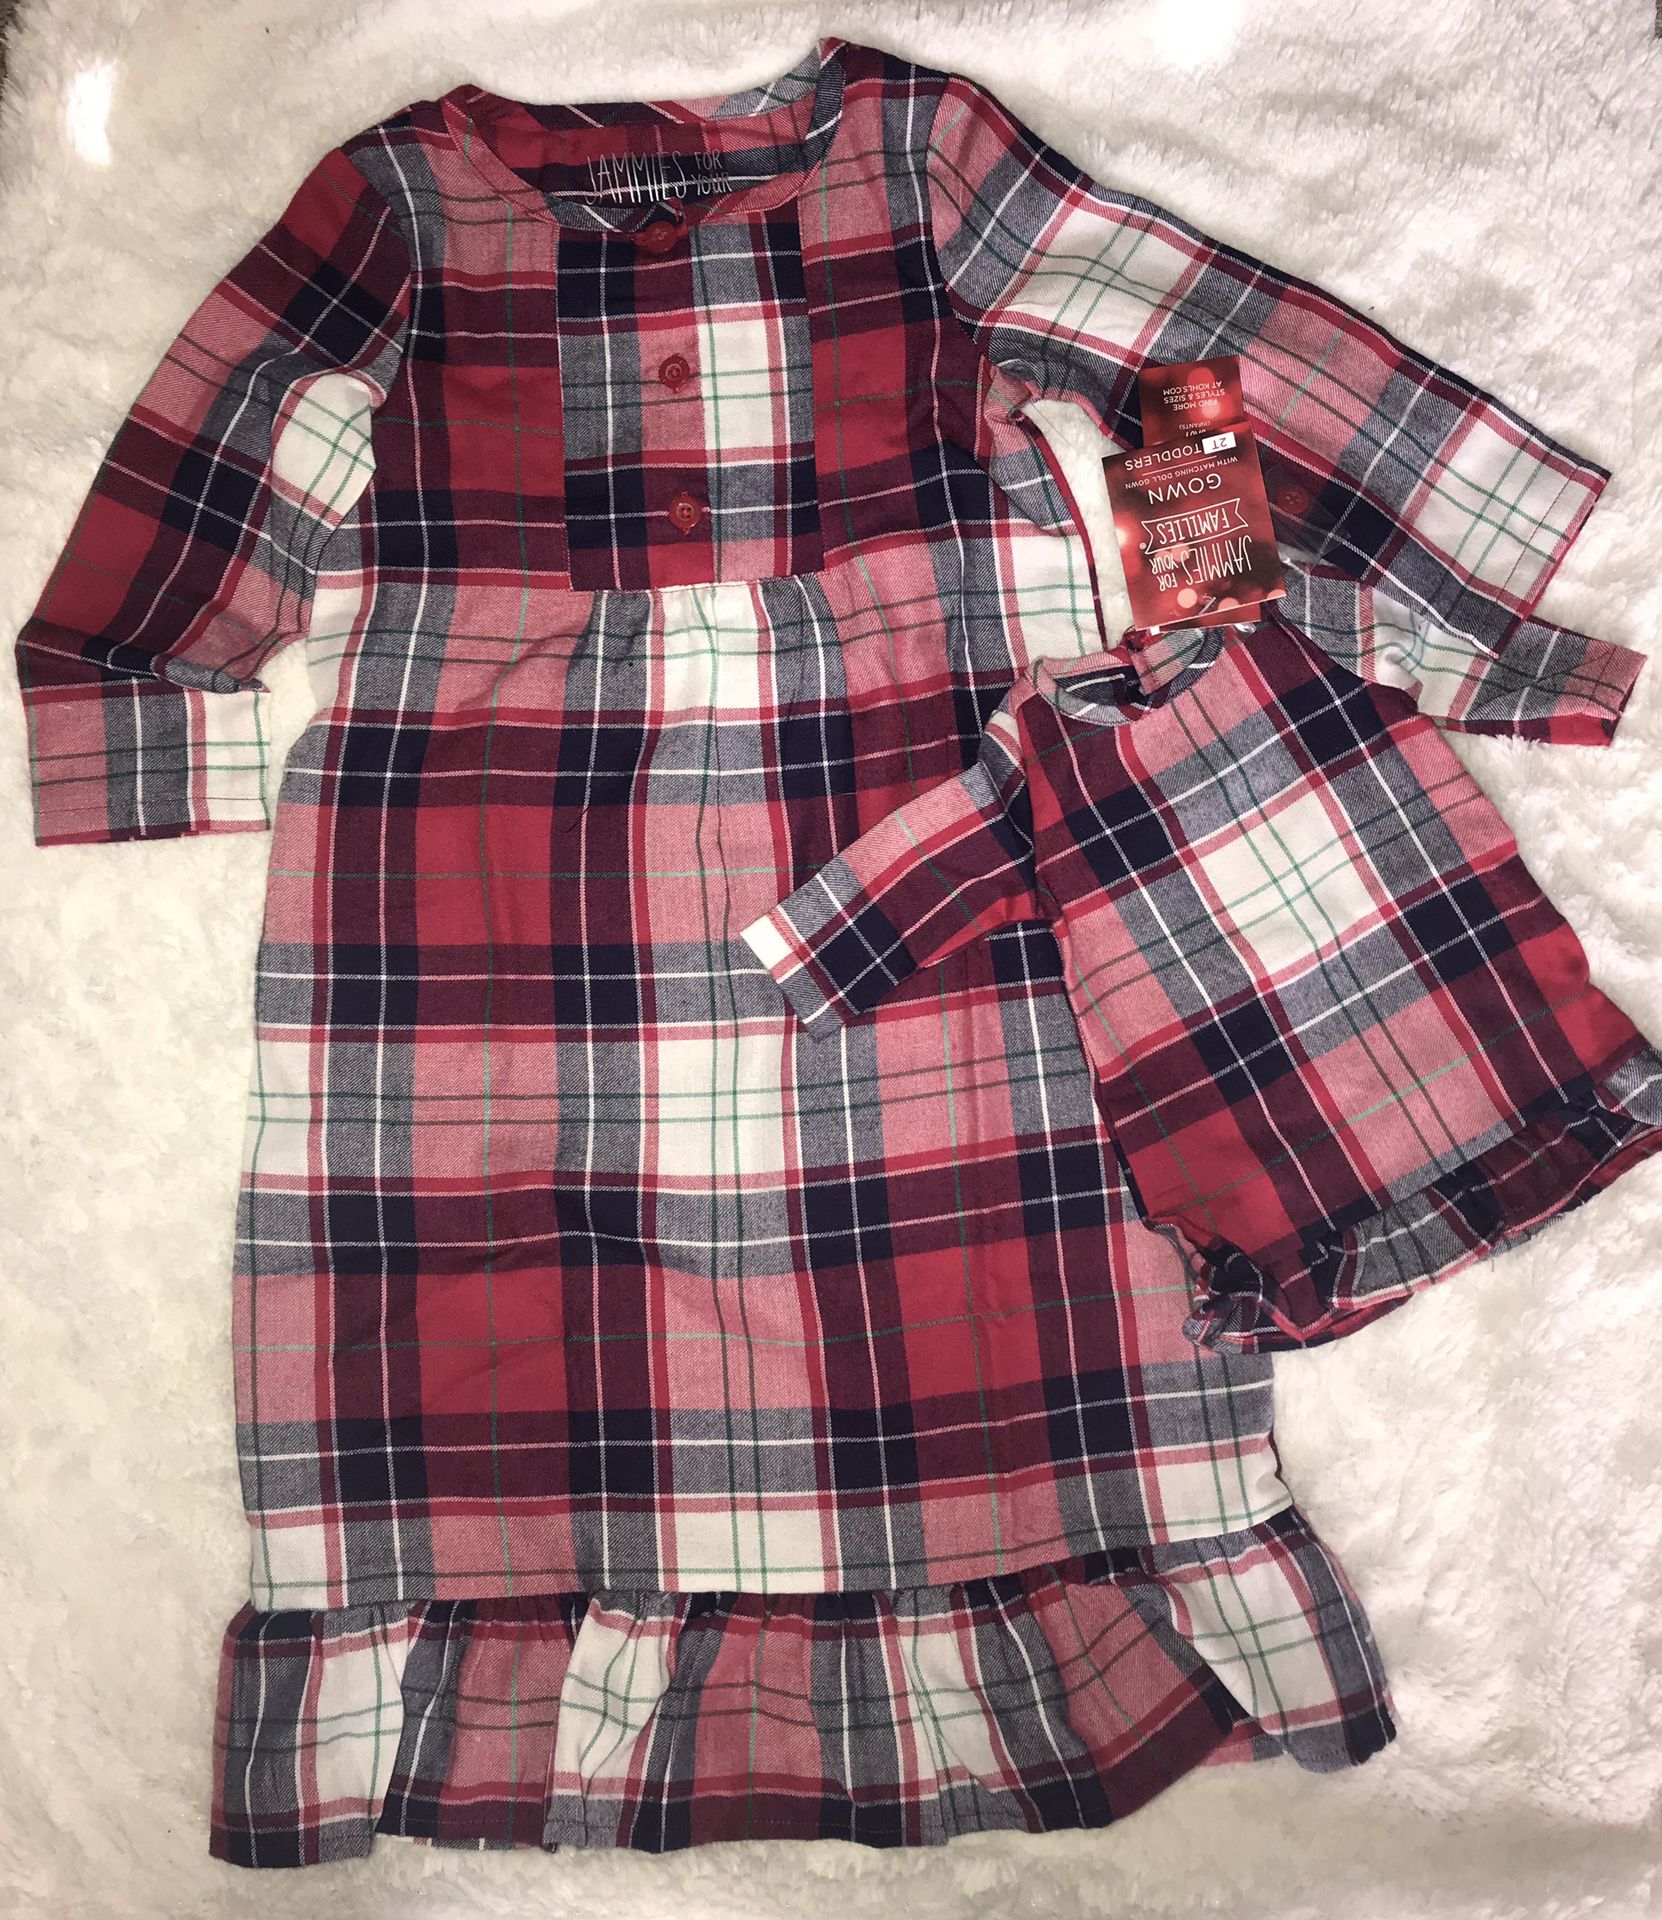 Toddler nightgowns with matching one for doll